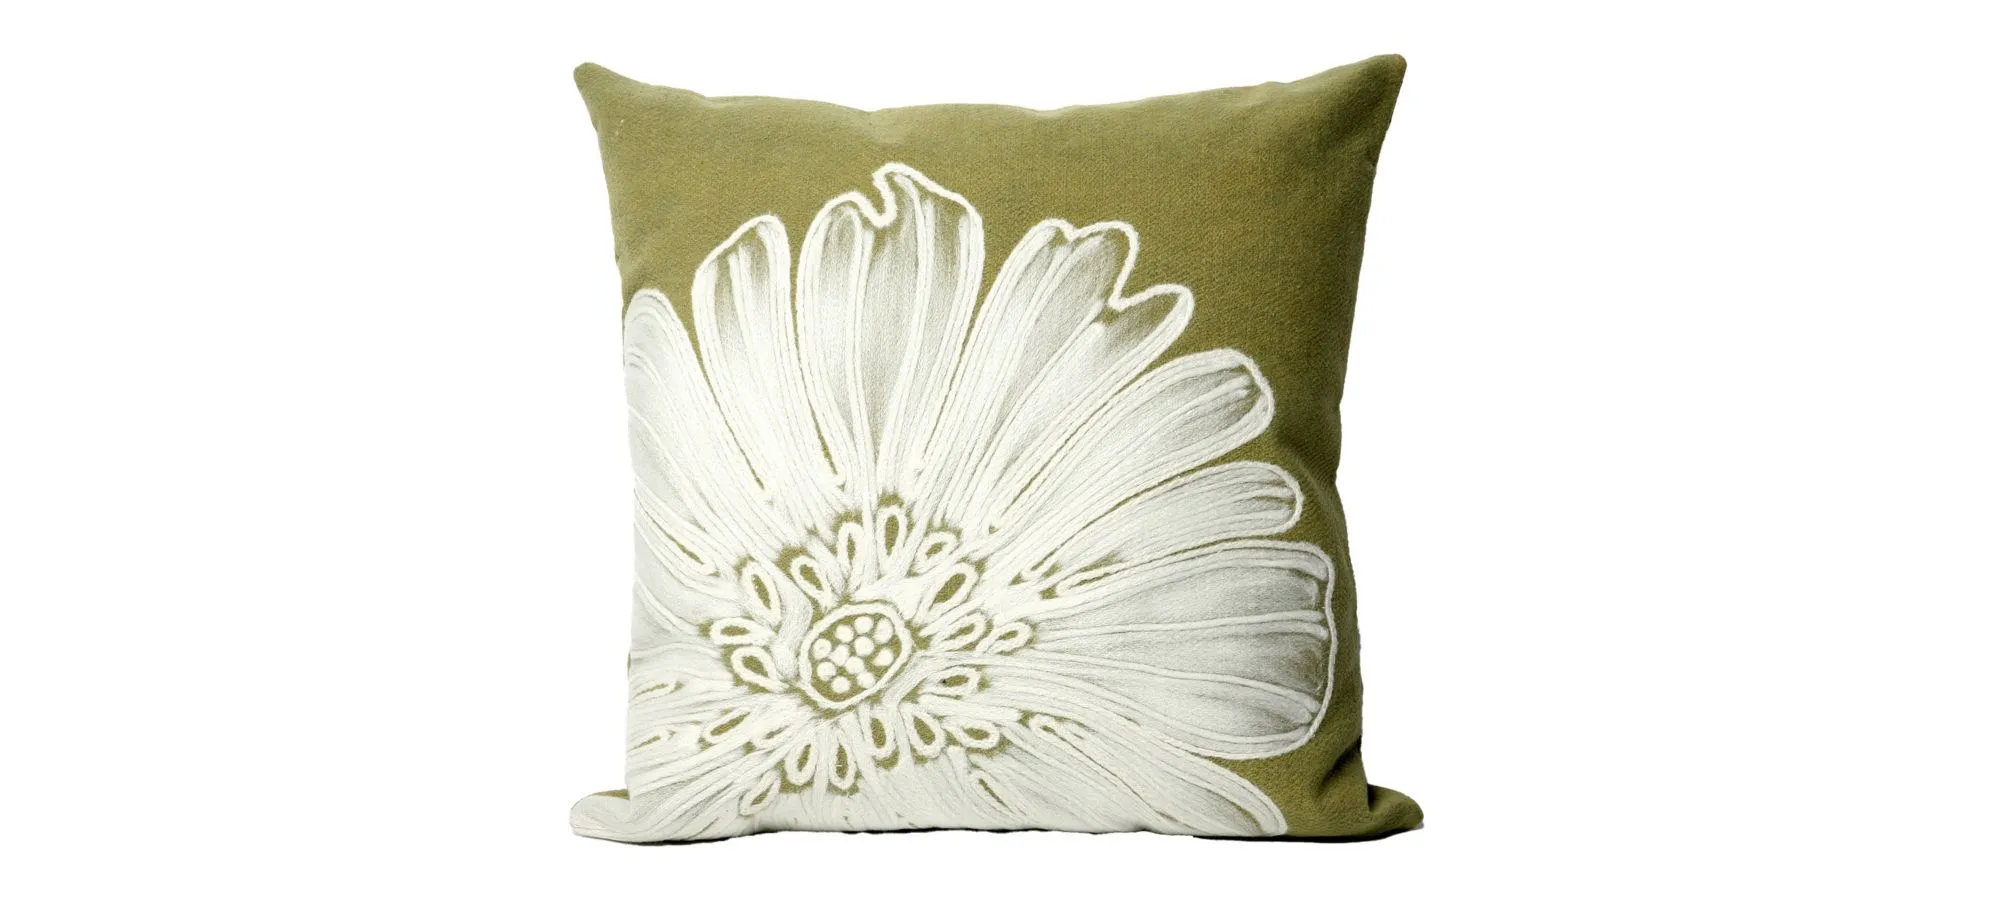 Liora Manne Visions II Antique Medallion Pillow in Sage by Trans-Ocean Import Co Inc